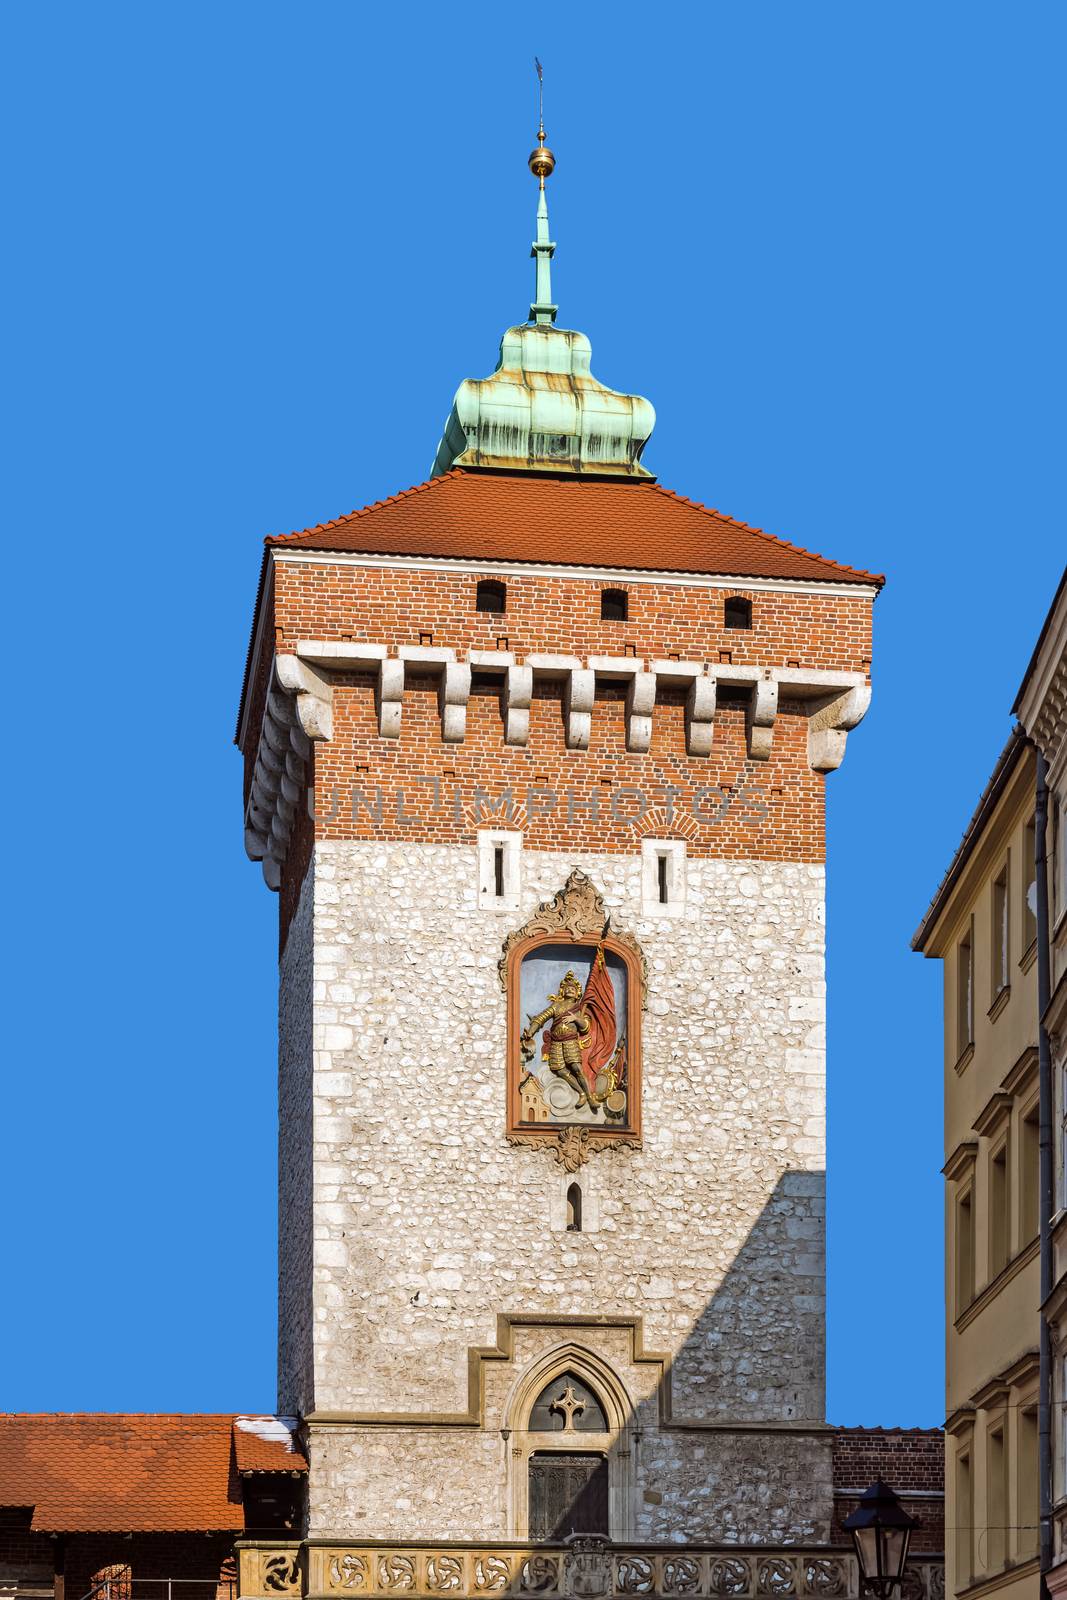 Medieval St.Florian's Gate tower in the Krakow Old Town Poland. Built of stone about the 14th century as a part of the town fortifications.